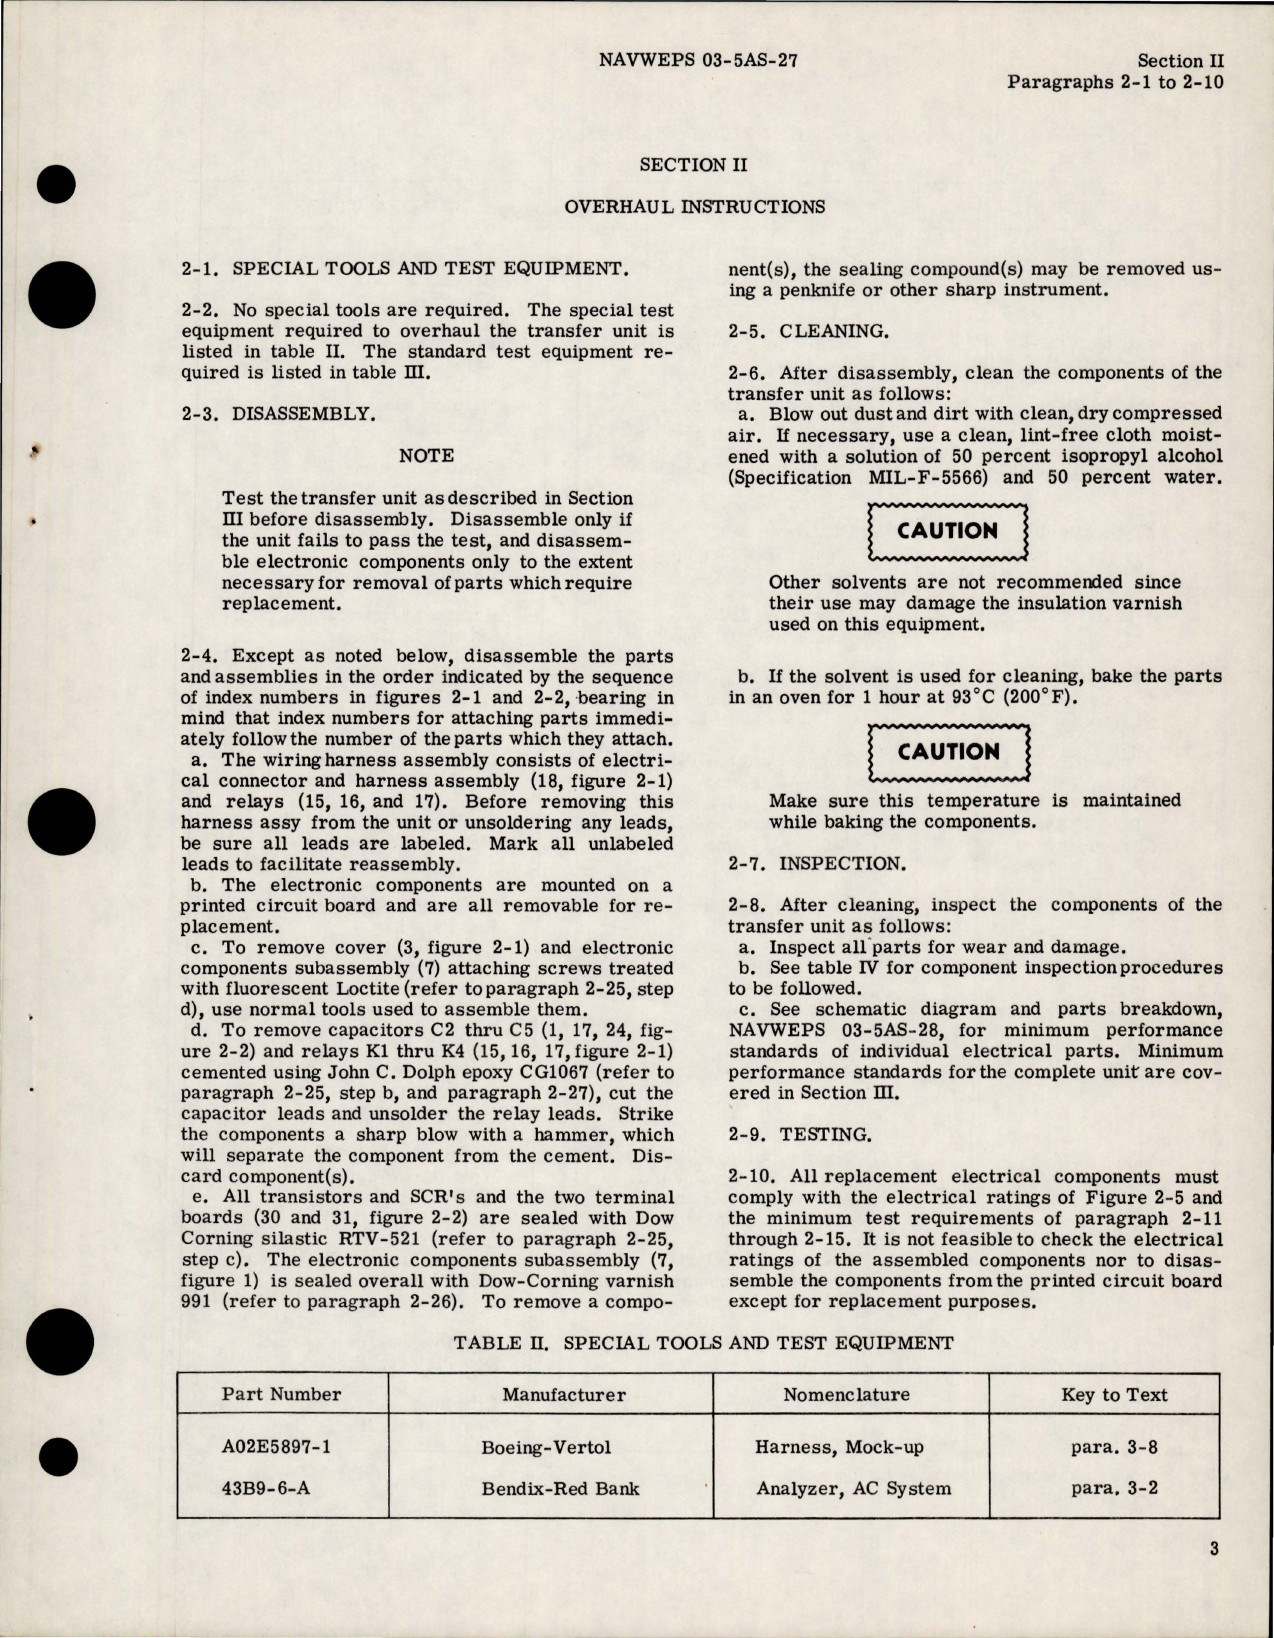 Sample page 7 from AirCorps Library document: Overhaul Instructions for Transfer Unit - Part 34B74-2-A 